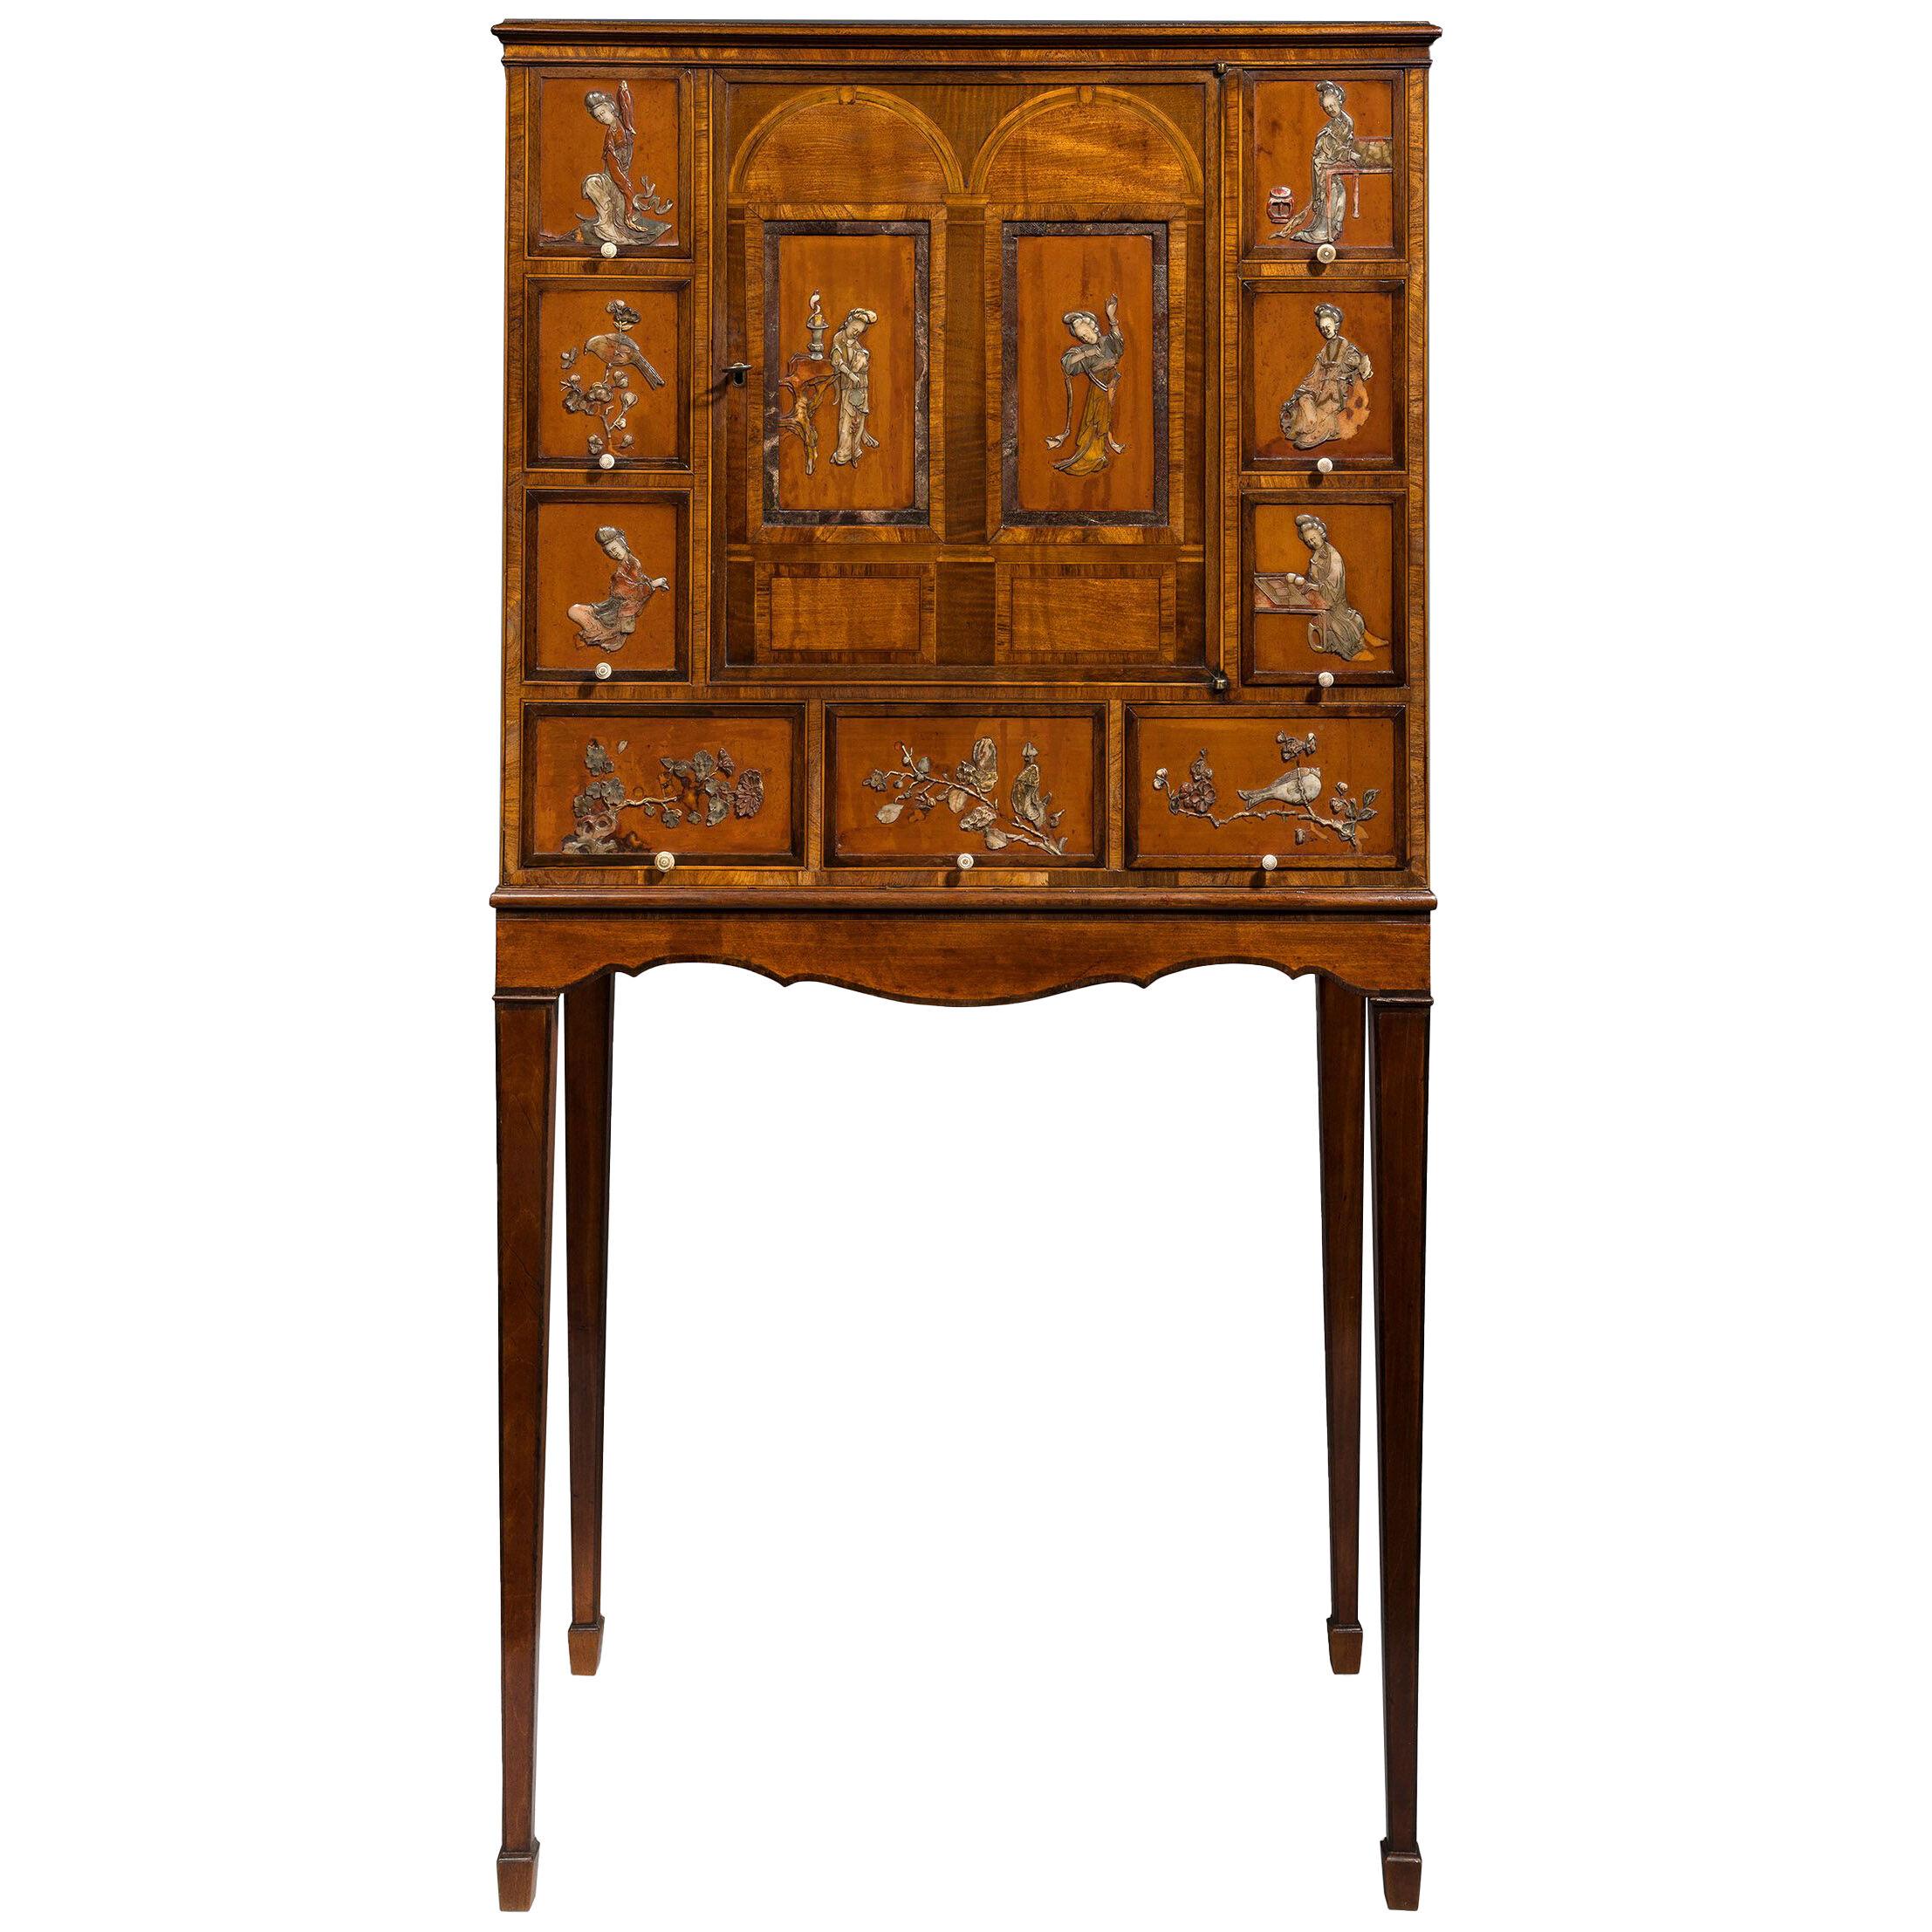 18th century cabinet on stand